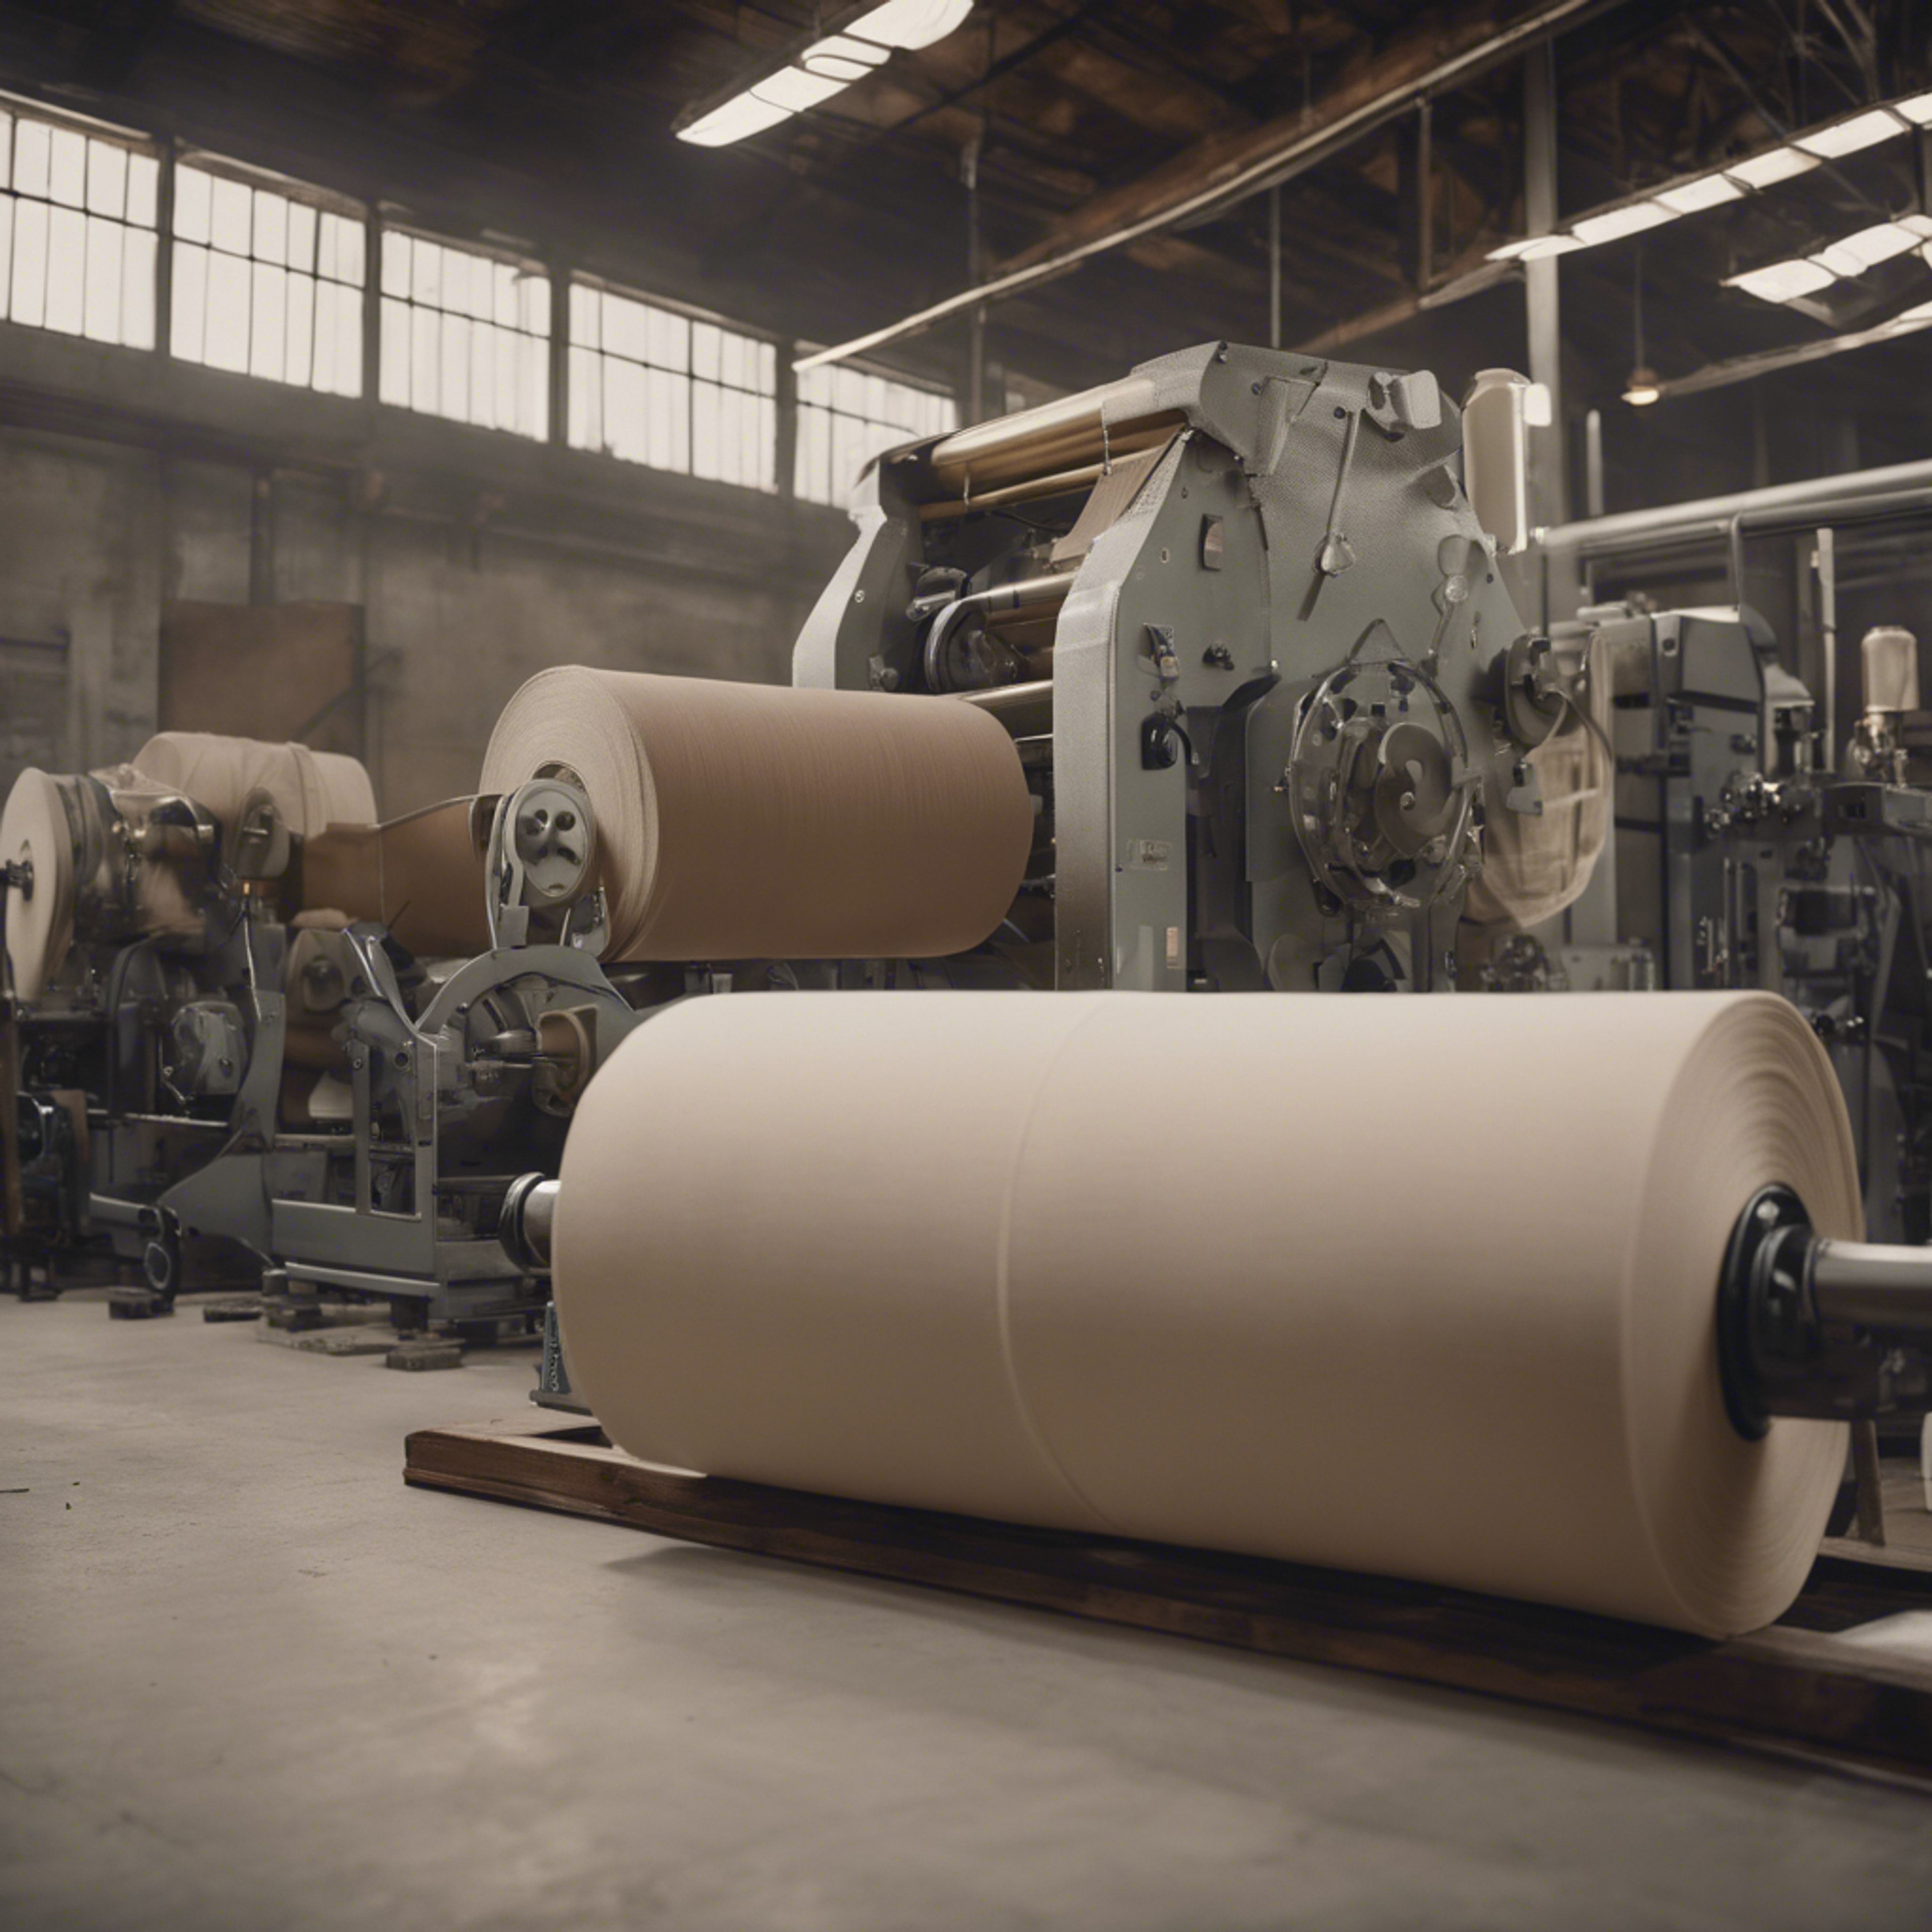 A behind the scenes shot of a linen mill with large rolls of neutral-toned fabric. Hintergrund[c00f9cec885f4ef7a035]